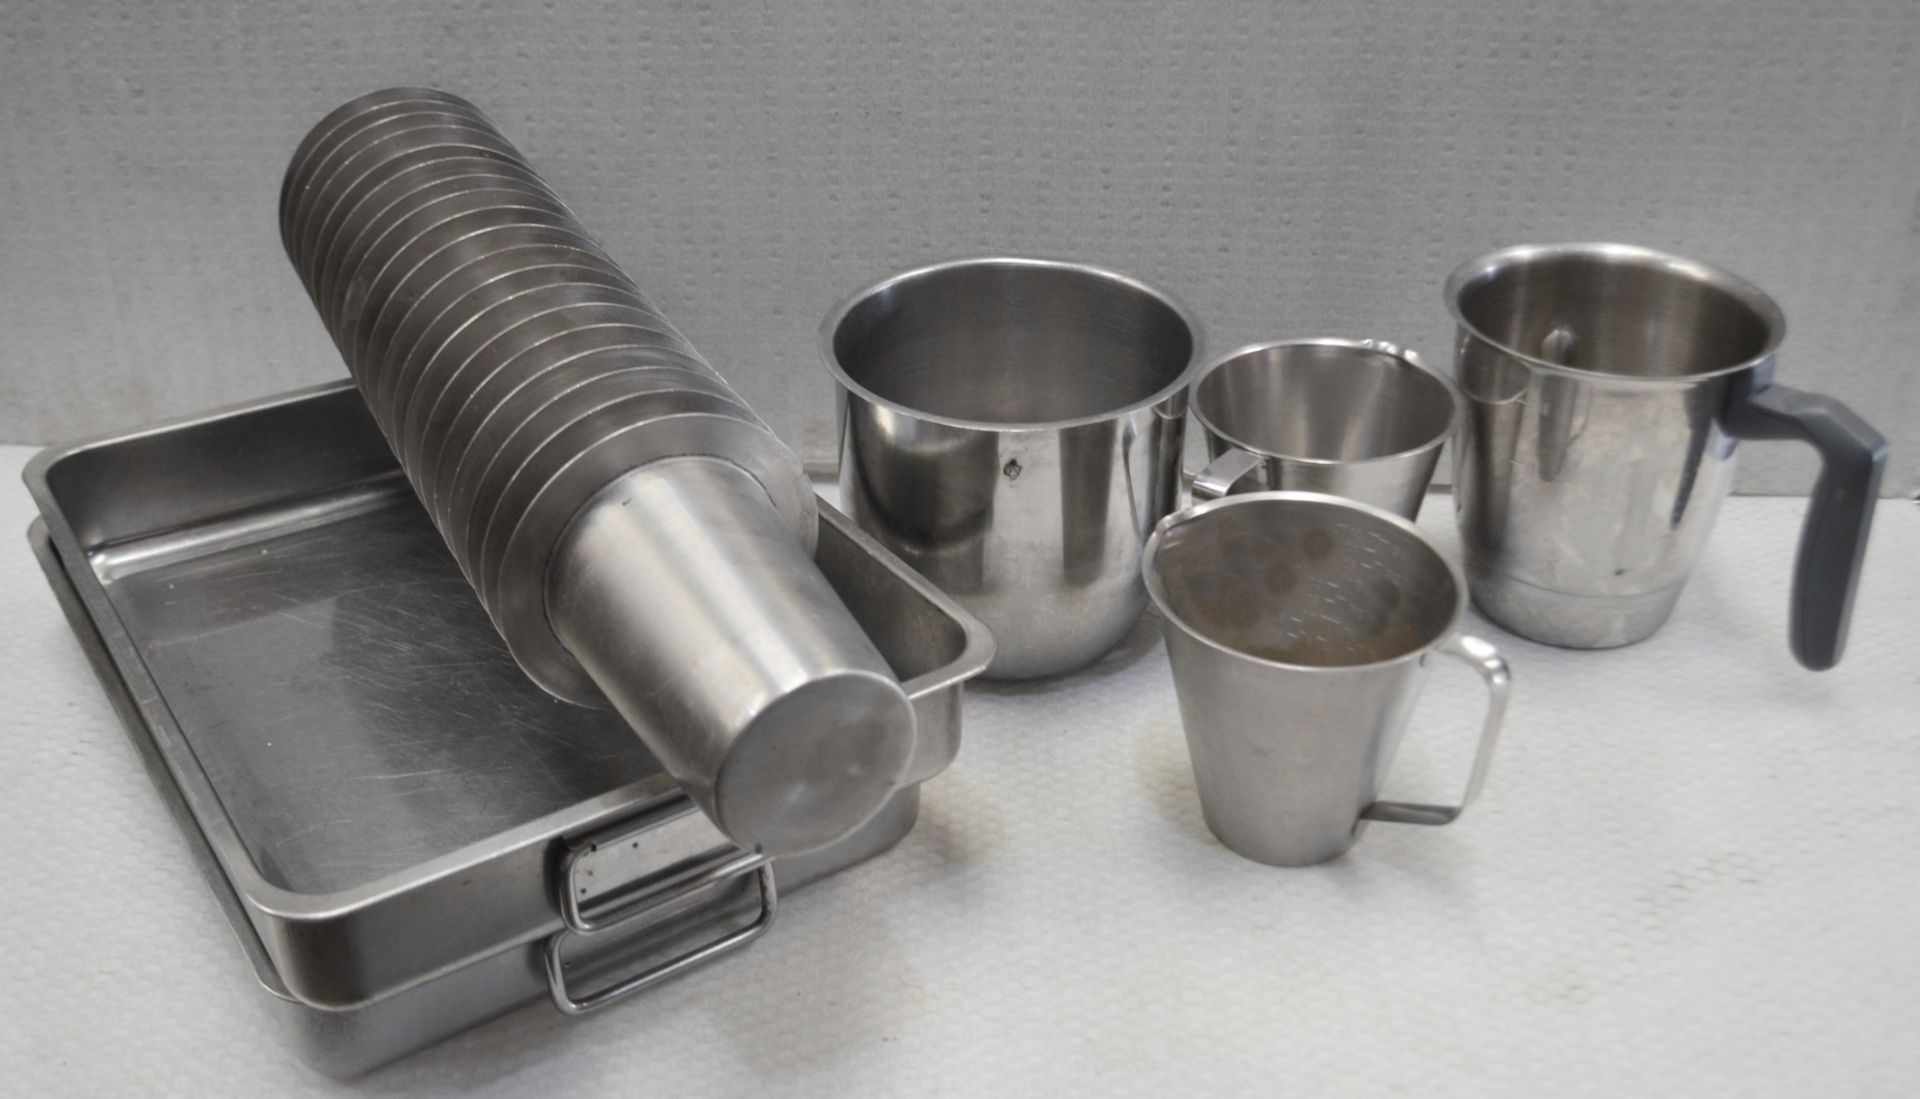 1 x Assorted Collection of Stainless Steel Trays, Jugs, Cups and Mixing Bowls For Commercial - Image 2 of 2